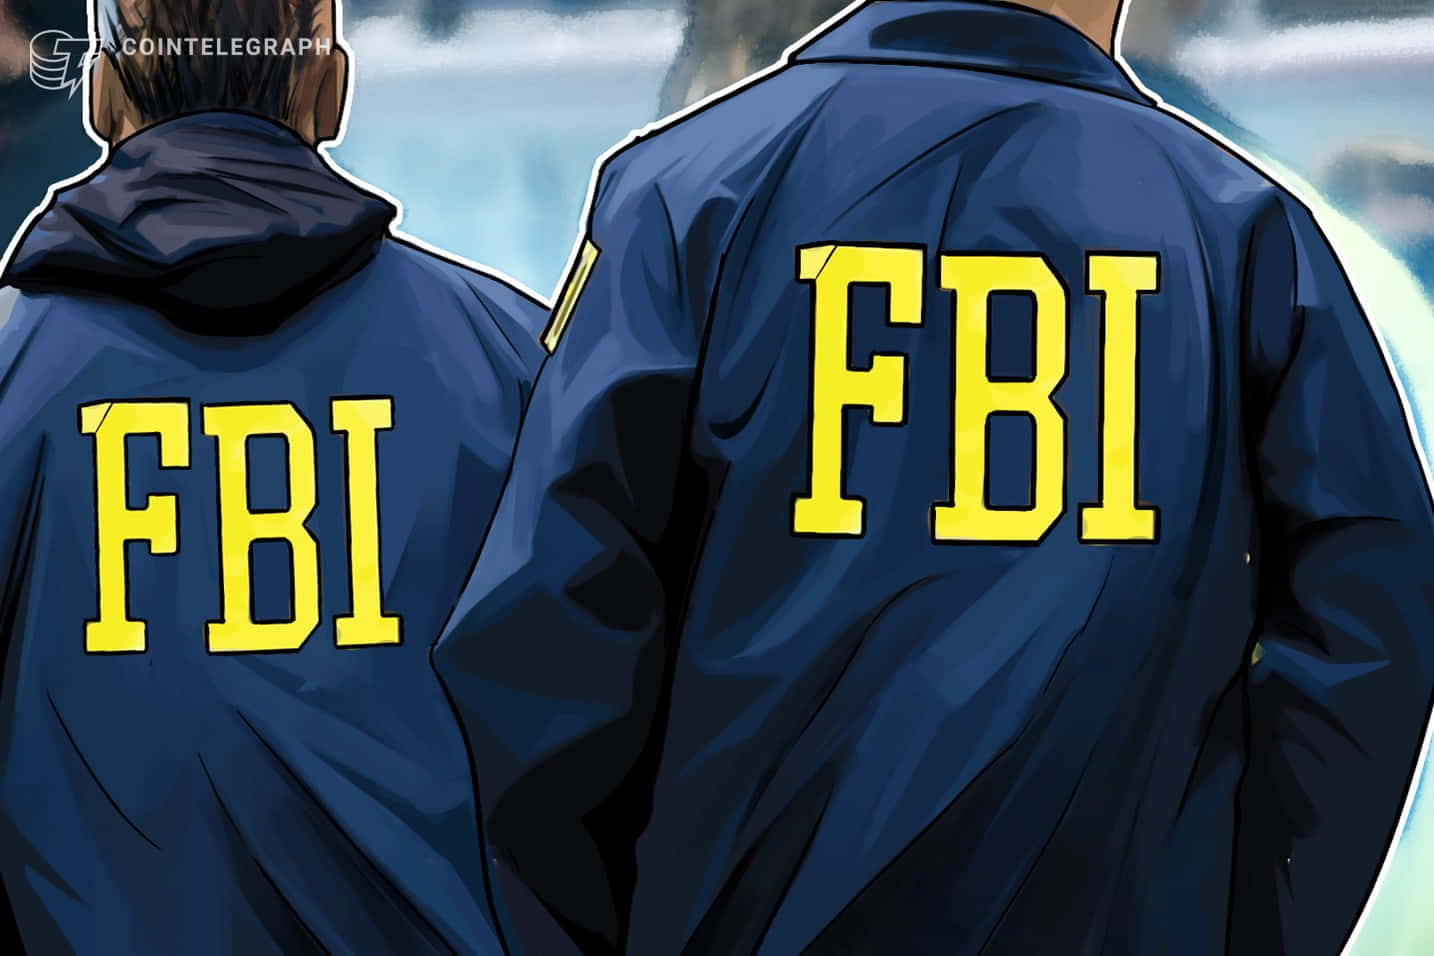 Two Men In Jackets With The Words Fbi On Them Background